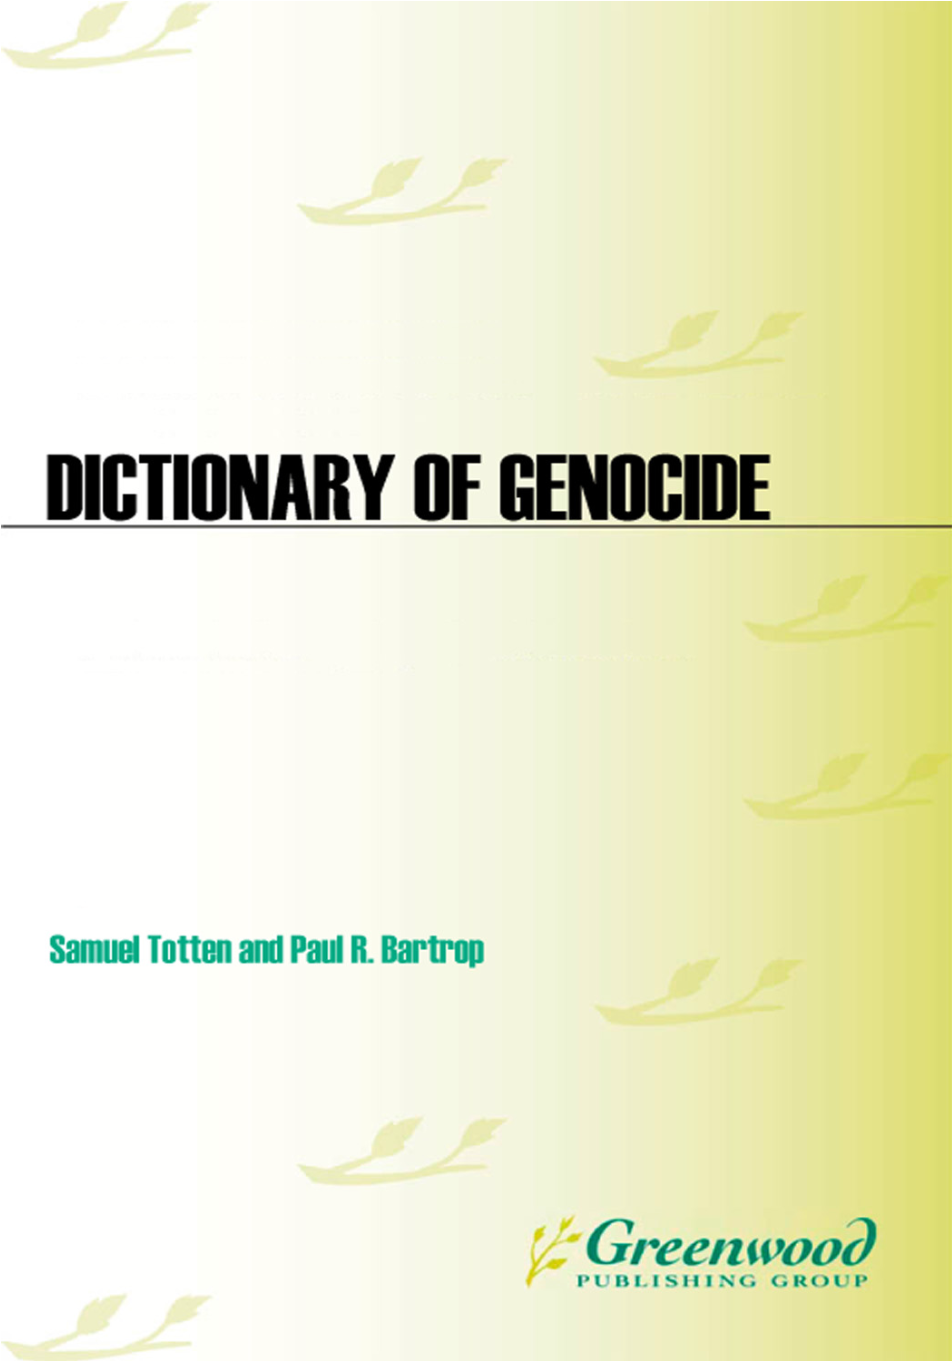 Dictionary of Genocide [2 volumes] page Cover1